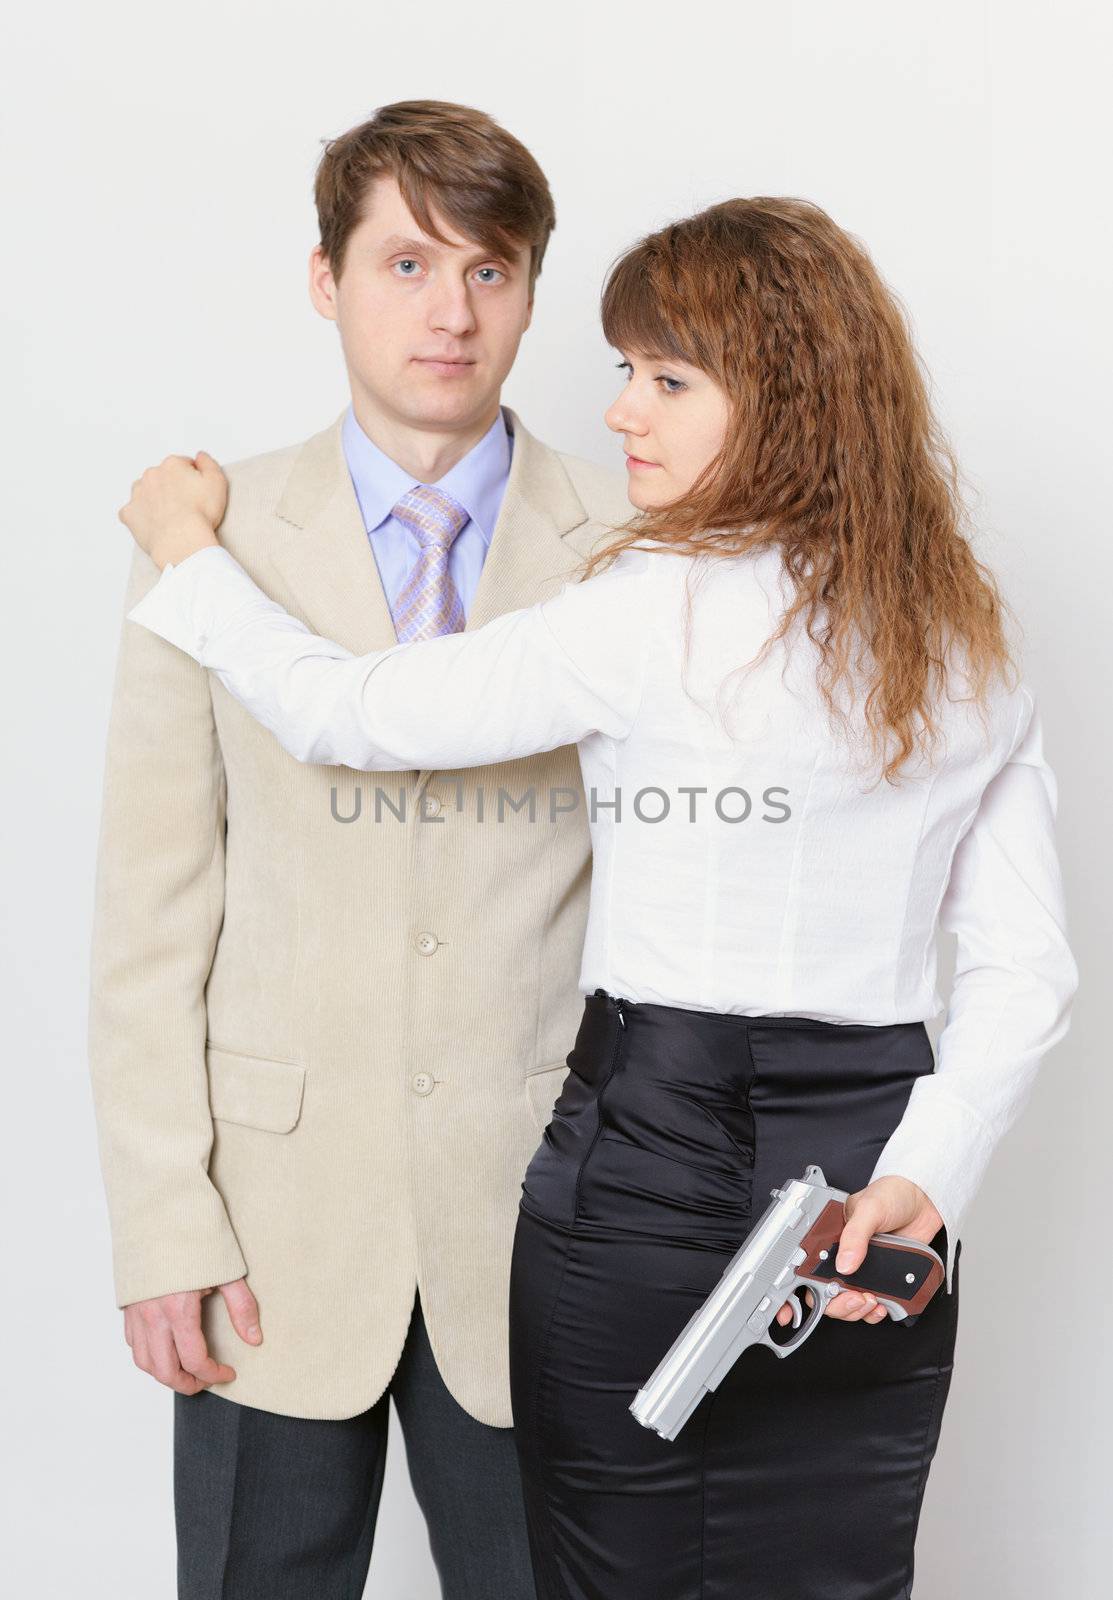 A young man and a beautiful woman with gun in hand